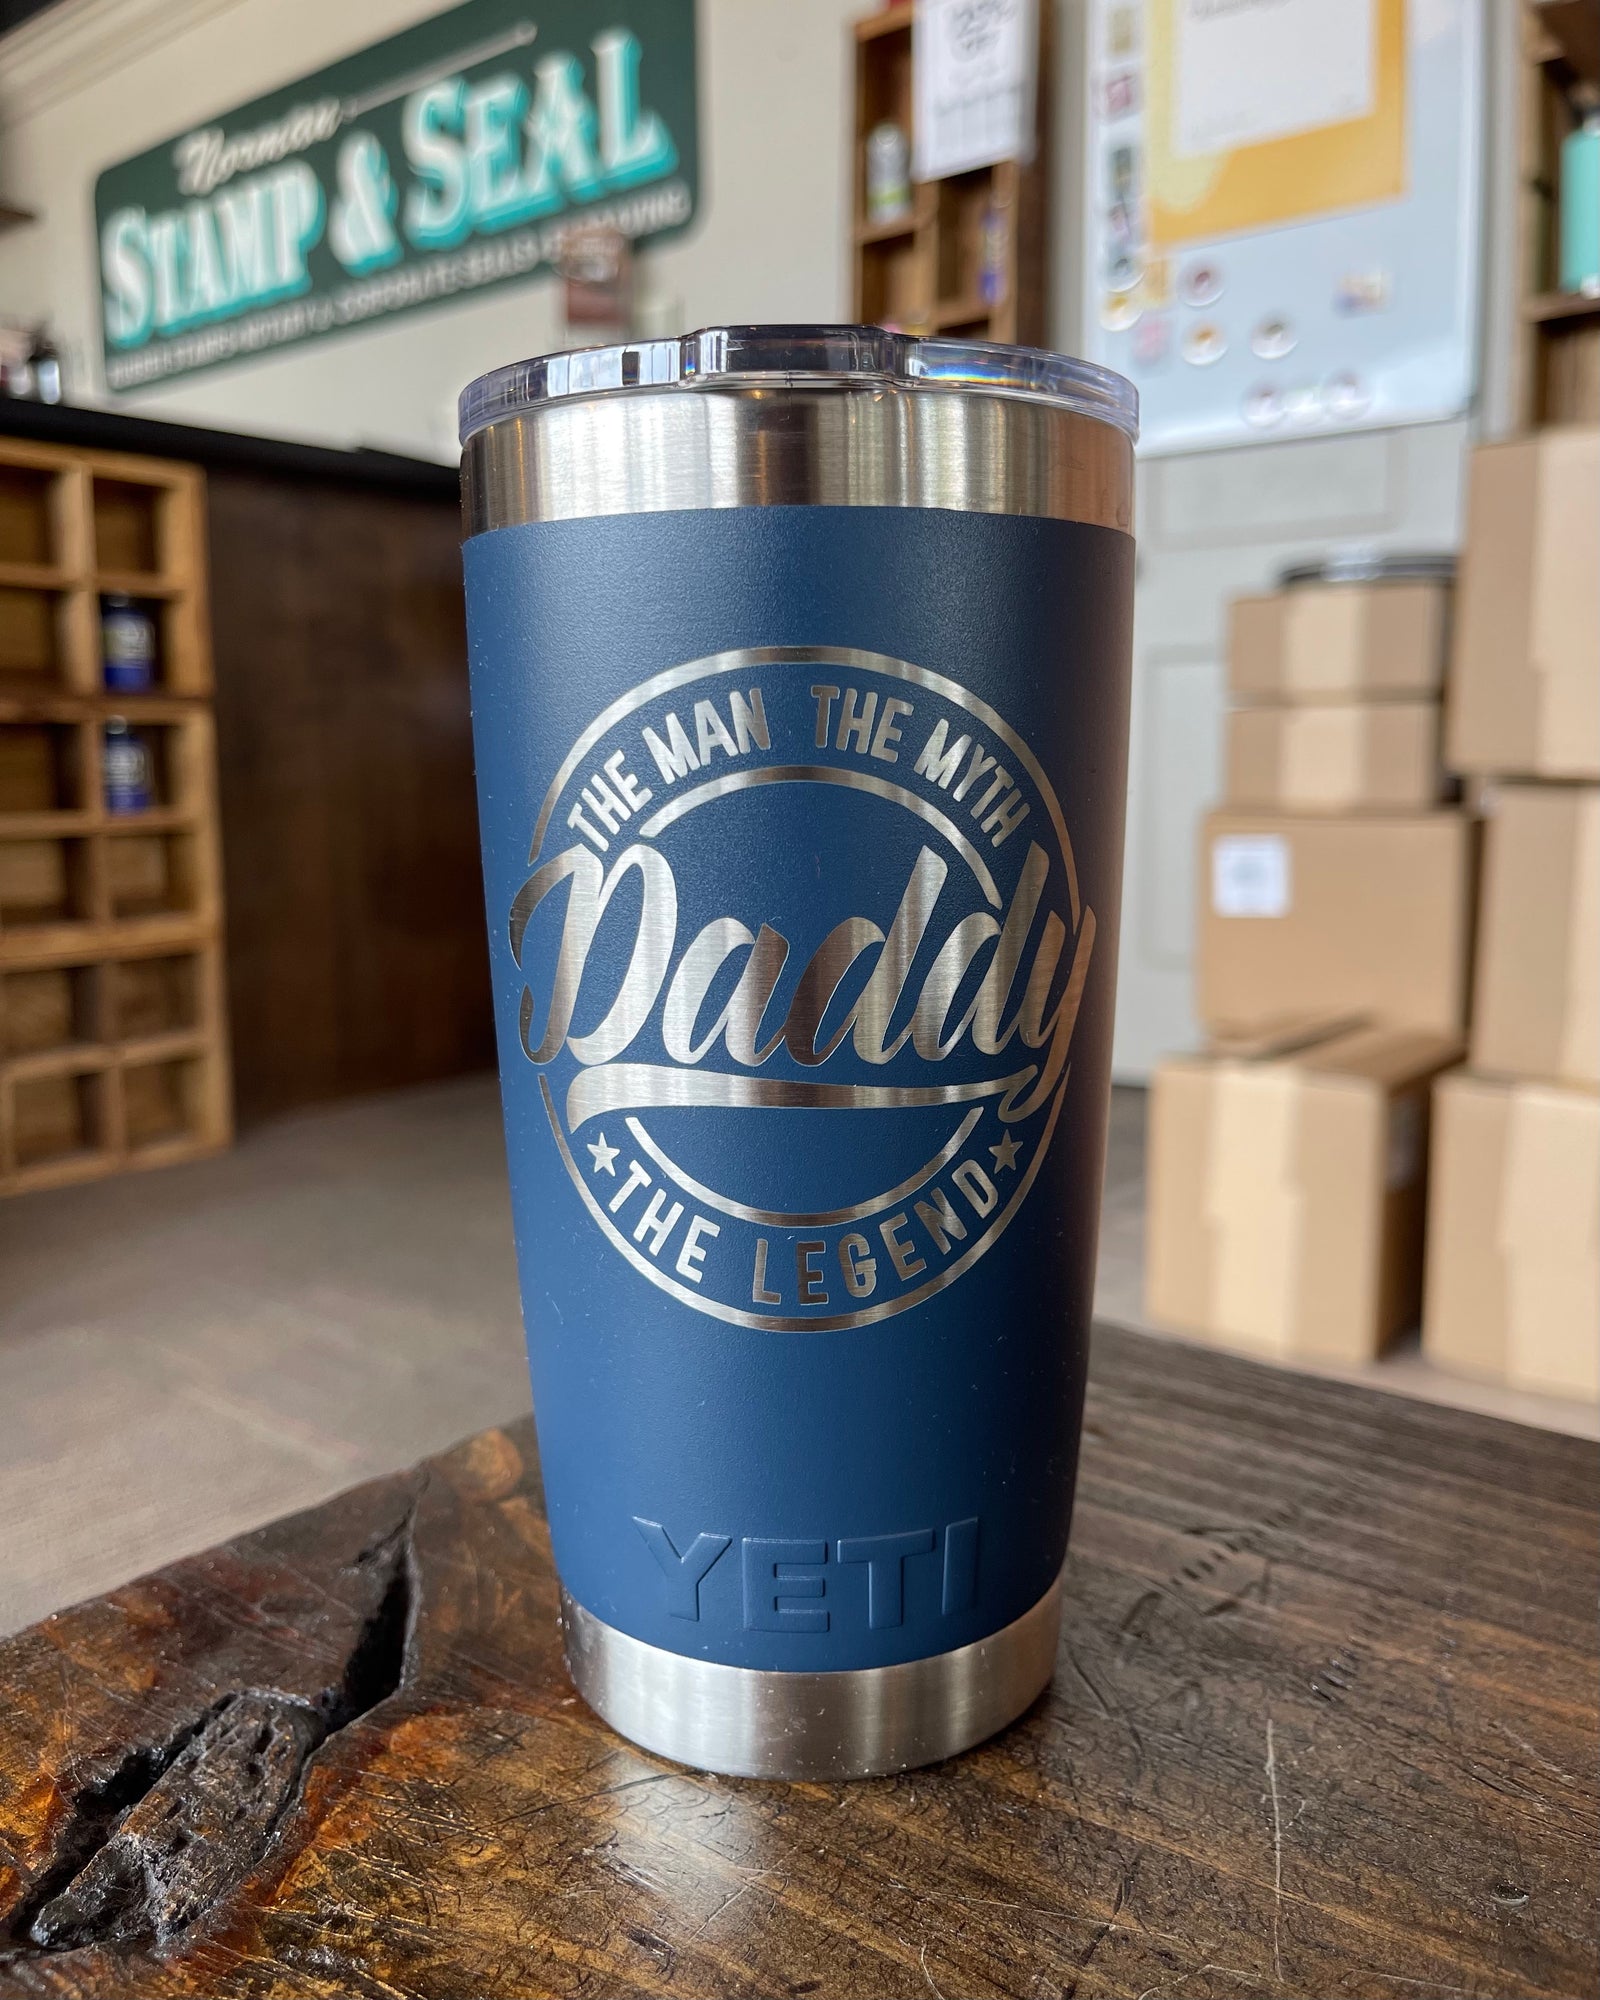 Husband Daddy Hero  Personalized Metal Can Cooler - Etchey